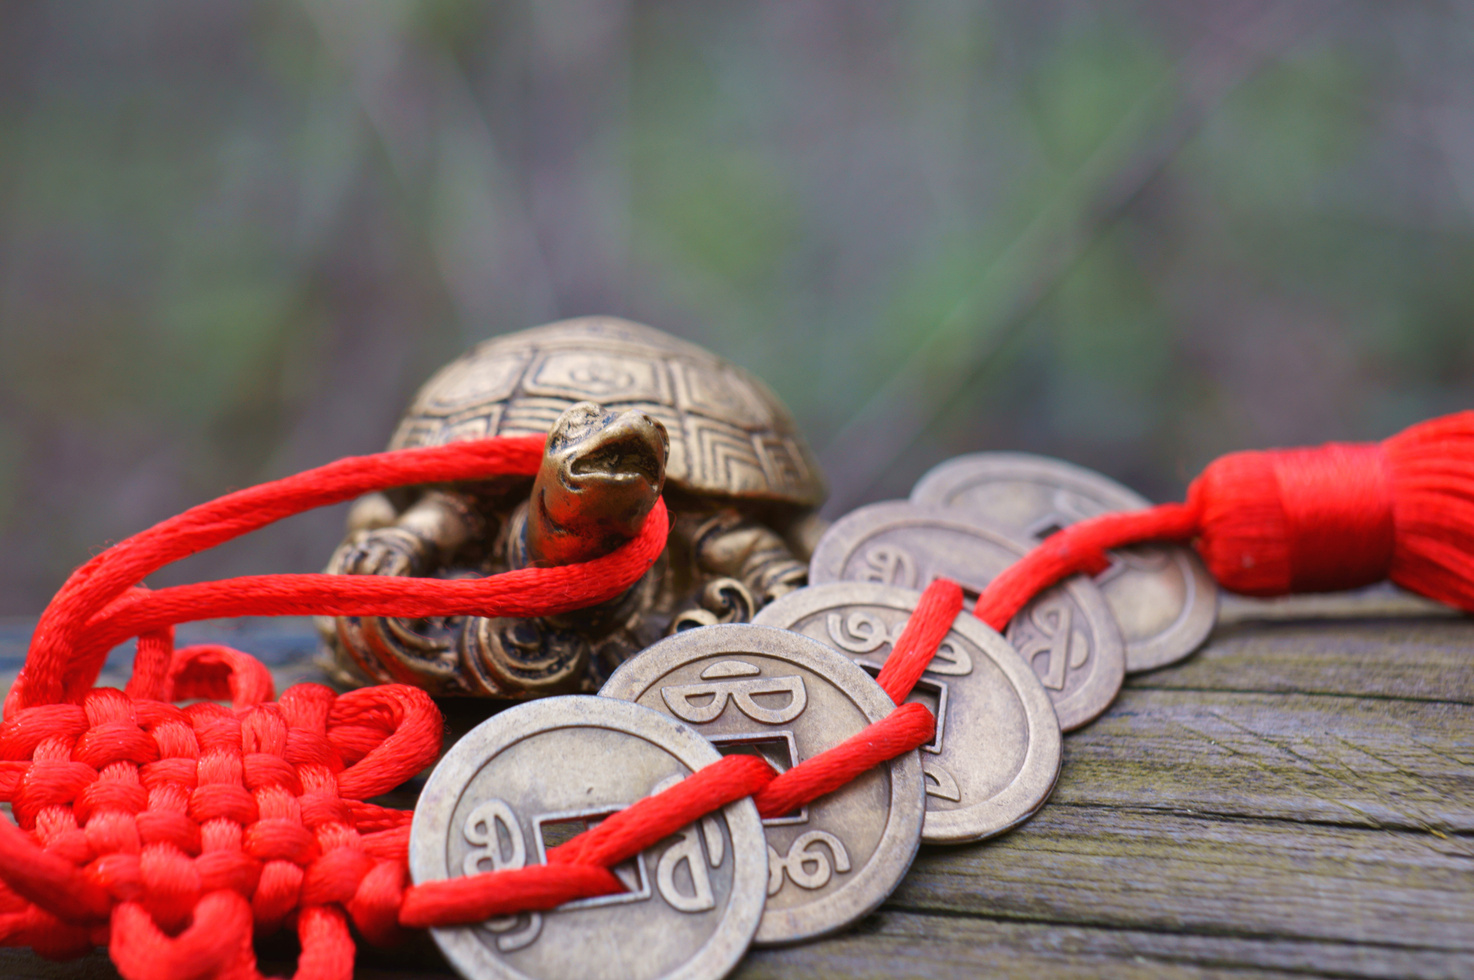 Turtle figurine with feng shui coins. An esoteric symbol.